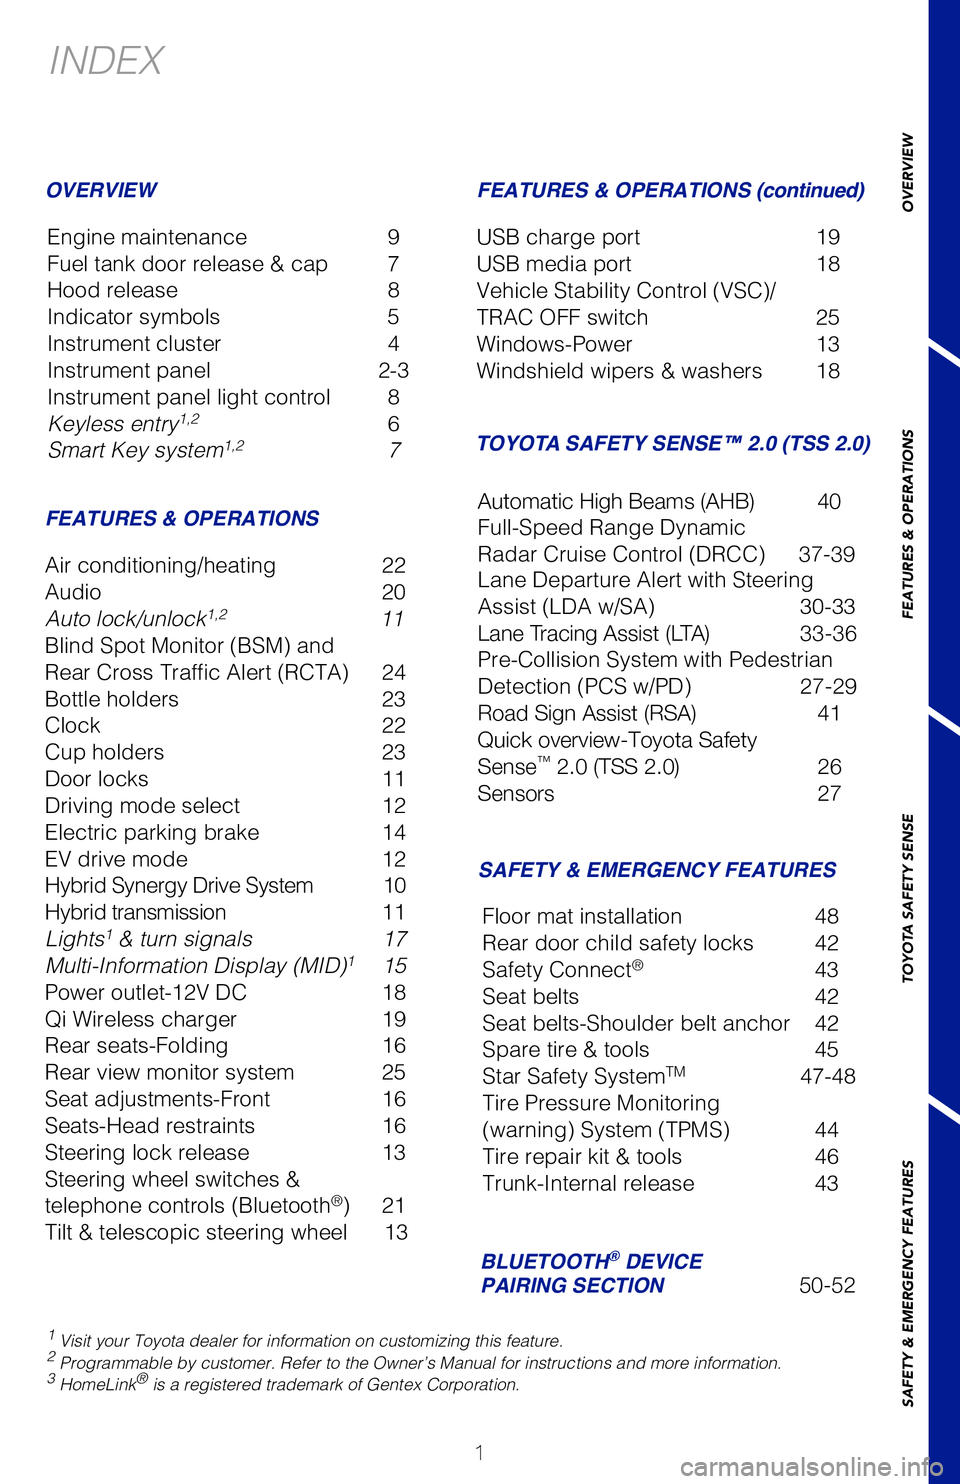 TOYOTA COROLLA HYBRID 2021  Owners Manual (in English) 1
OVERVIEW
FEATURES & OPERATIONS
TOYOTA SAFETY SENSE
SAFETY & EMERGENCY FEATURES
1 Visit your Toyota dealer for information on customizing this feature.2 Programmable by customer. Refer to the Owner�